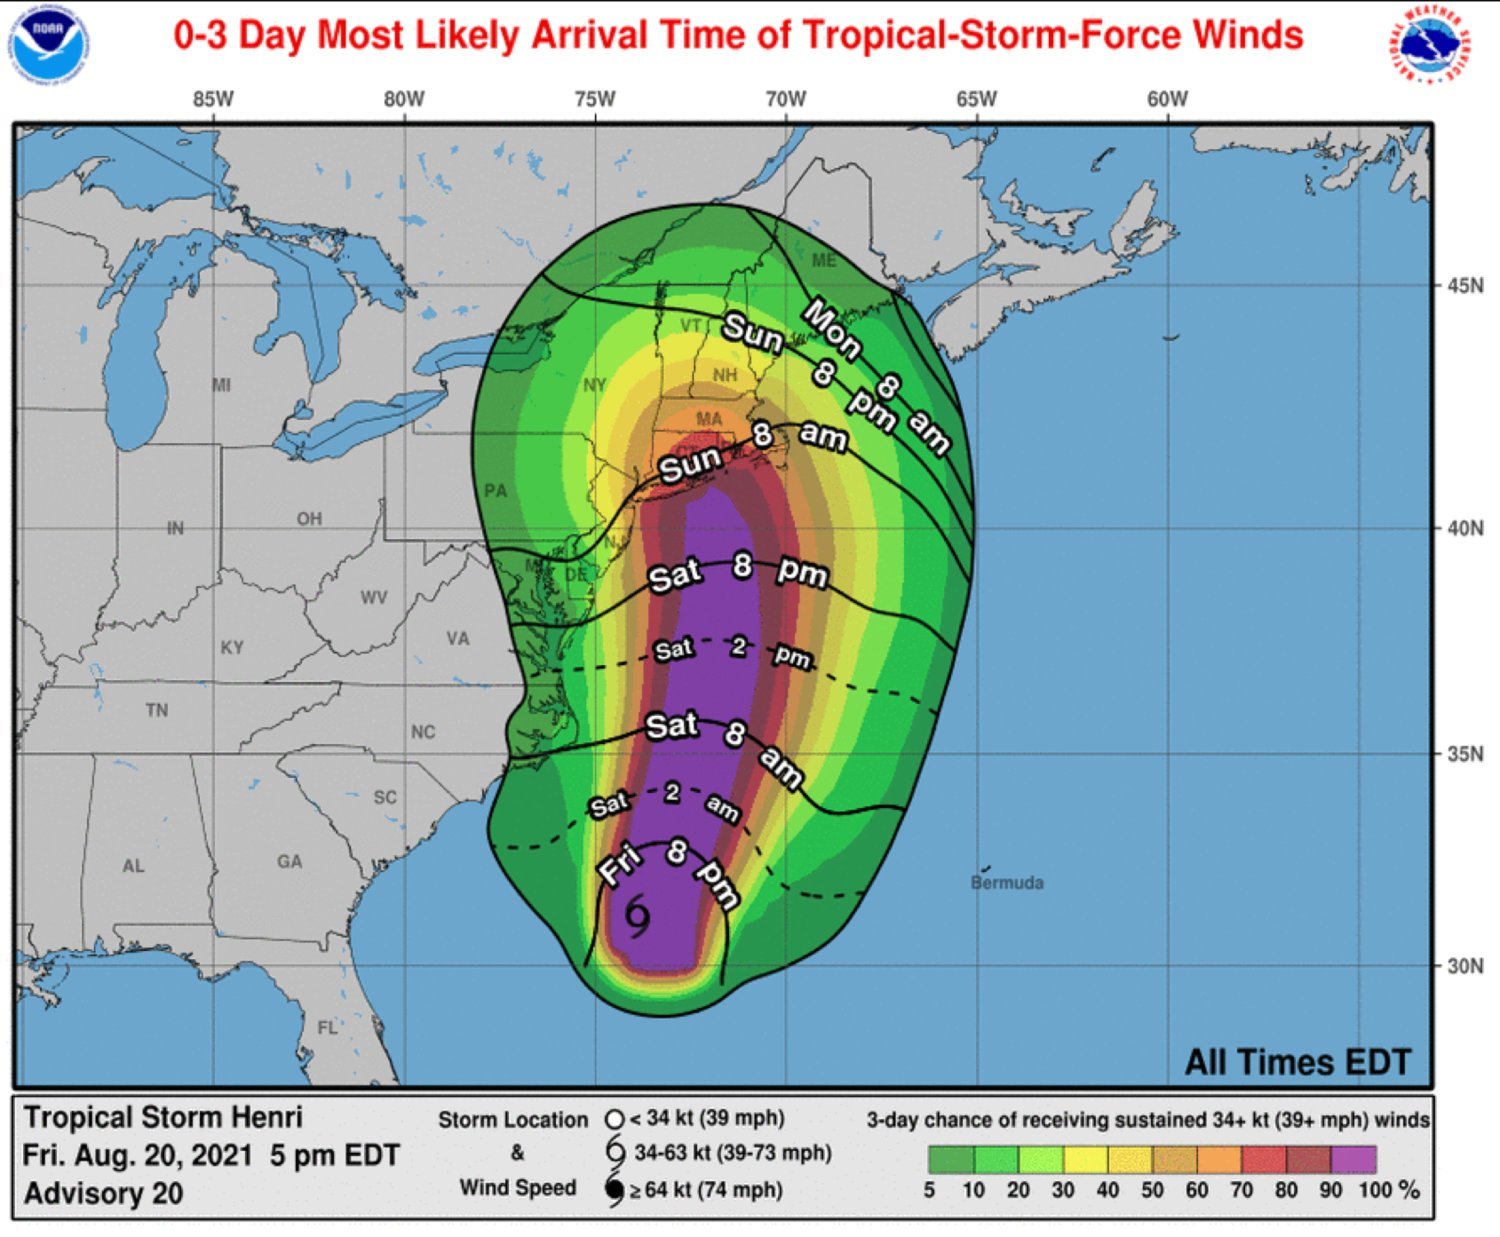 Tropical Storm Henri was originally projected to make landfall as a hurricane on Long Island and cause high levels of wind.